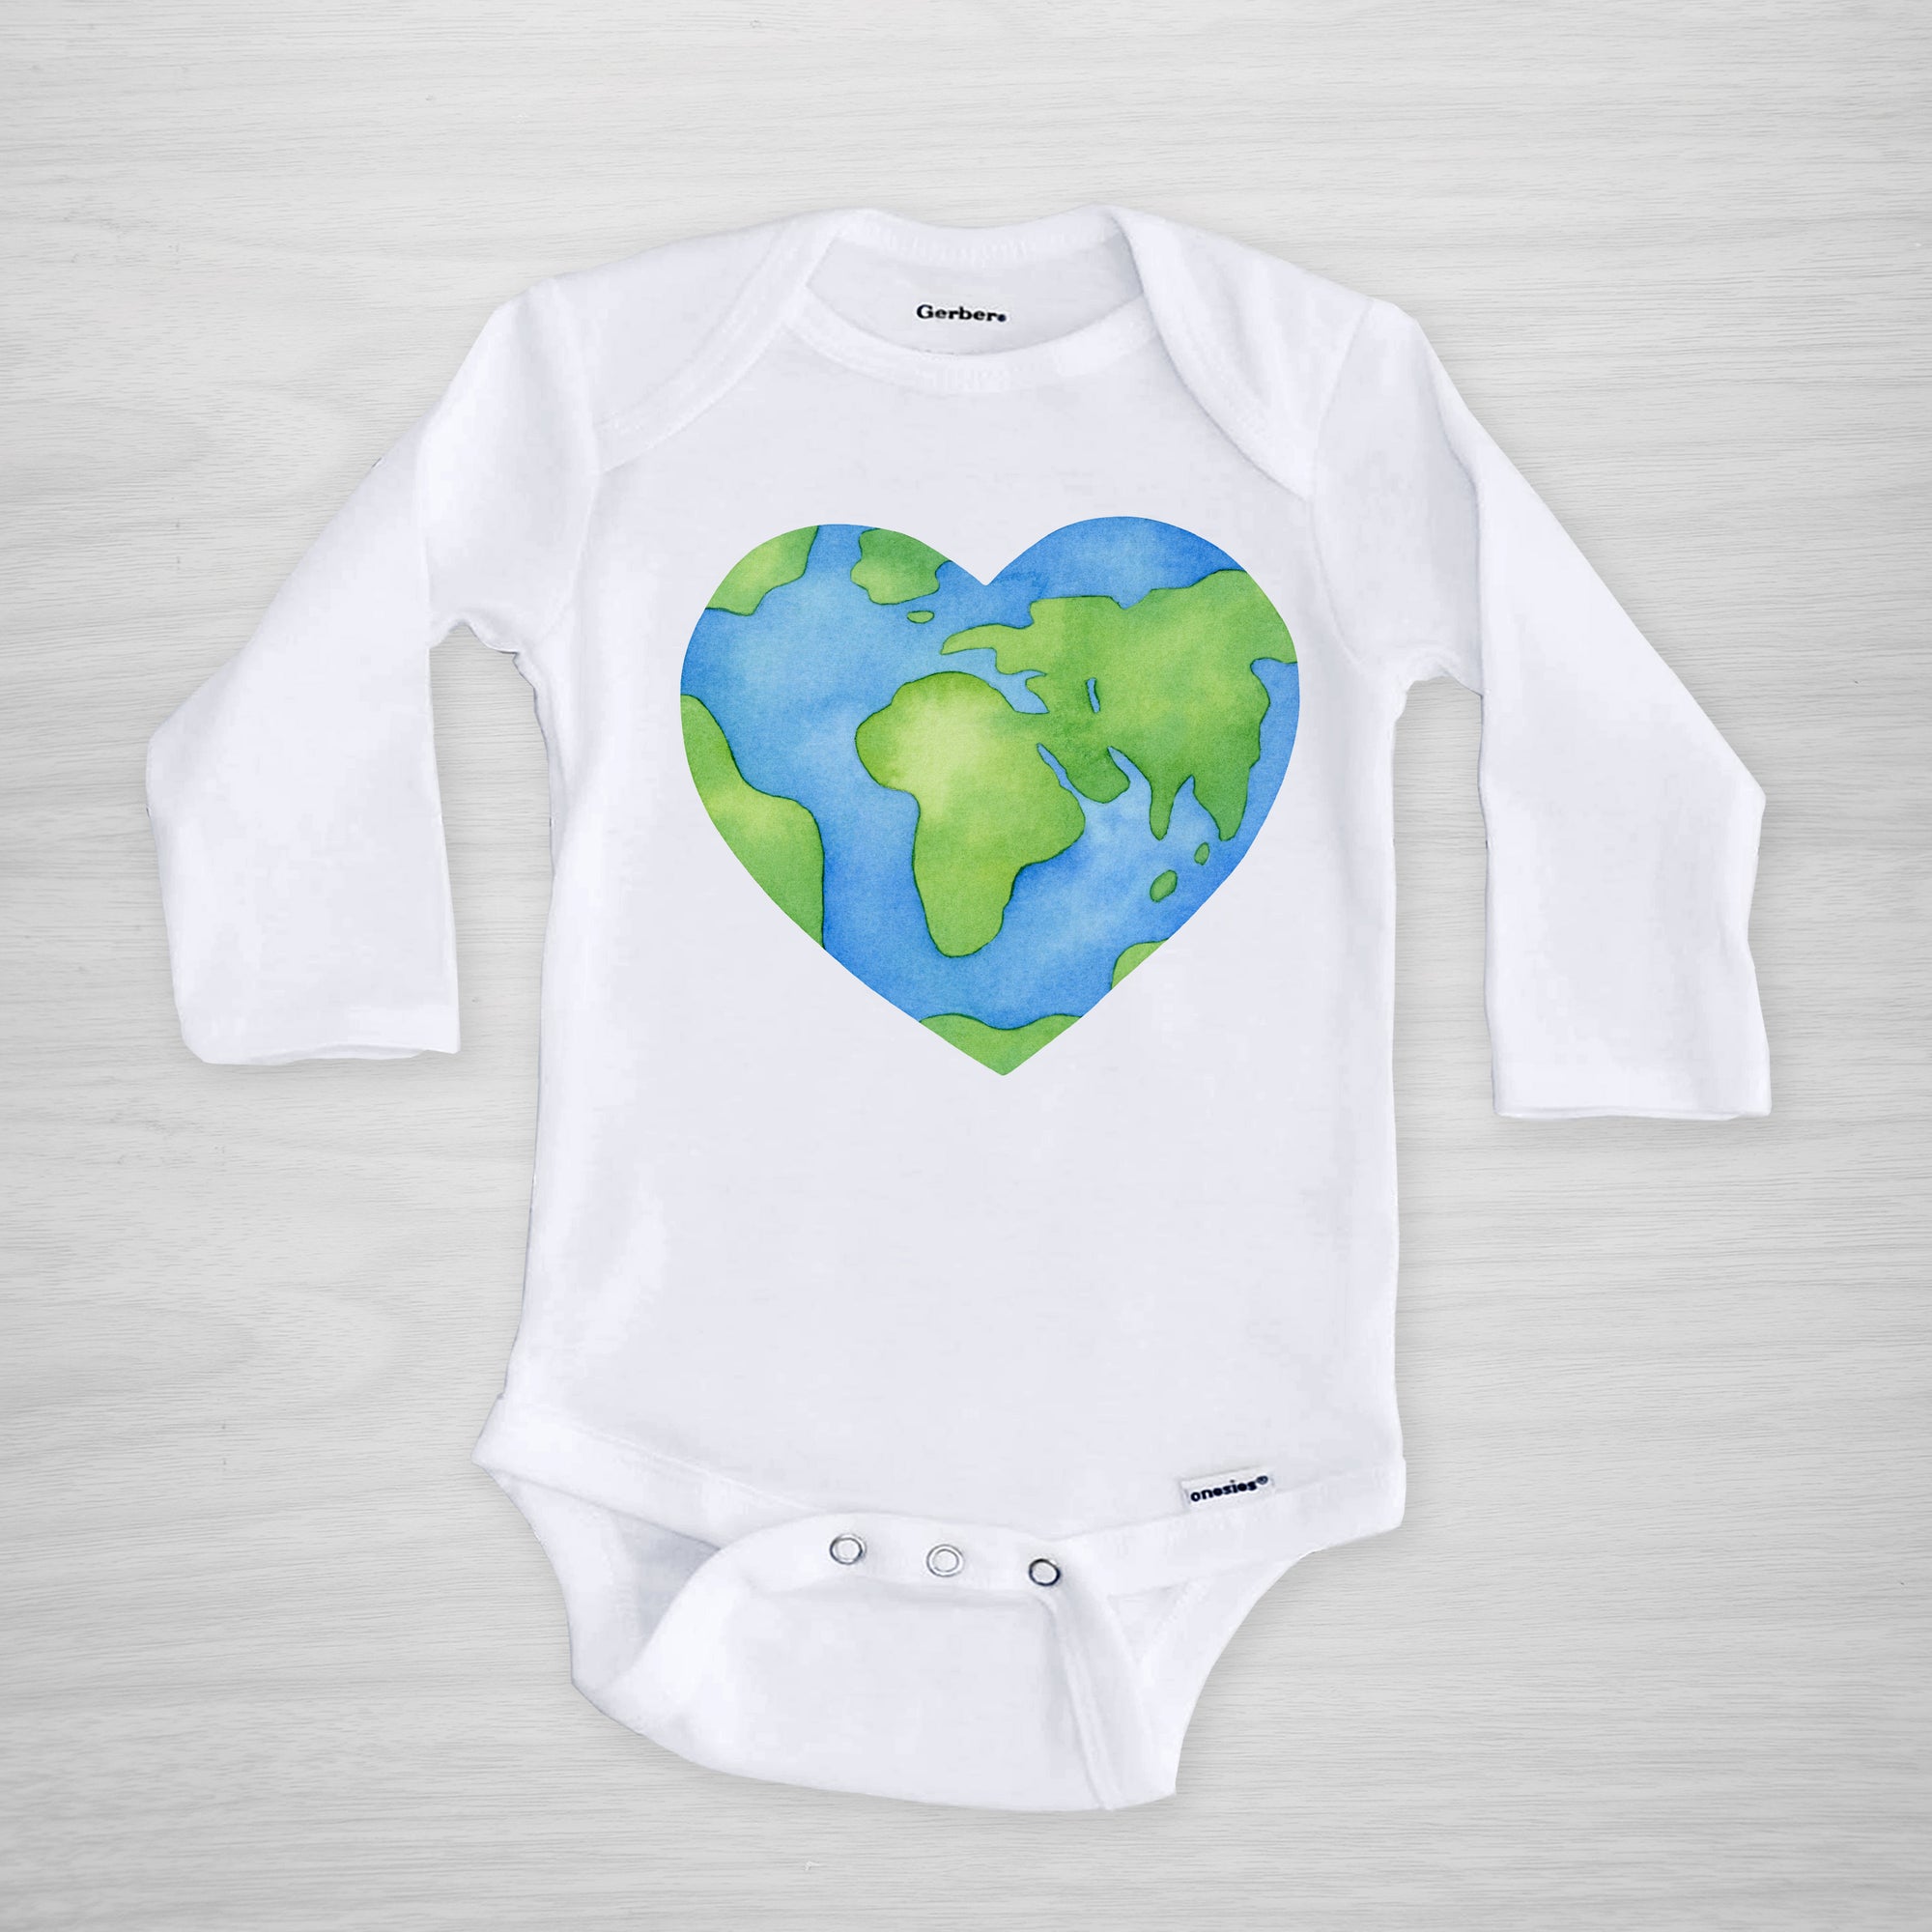 Earth Day Onesie, Long Sleeved, Watercolor planet earth in a heart, Gerber Onesie, Eco-safe inks